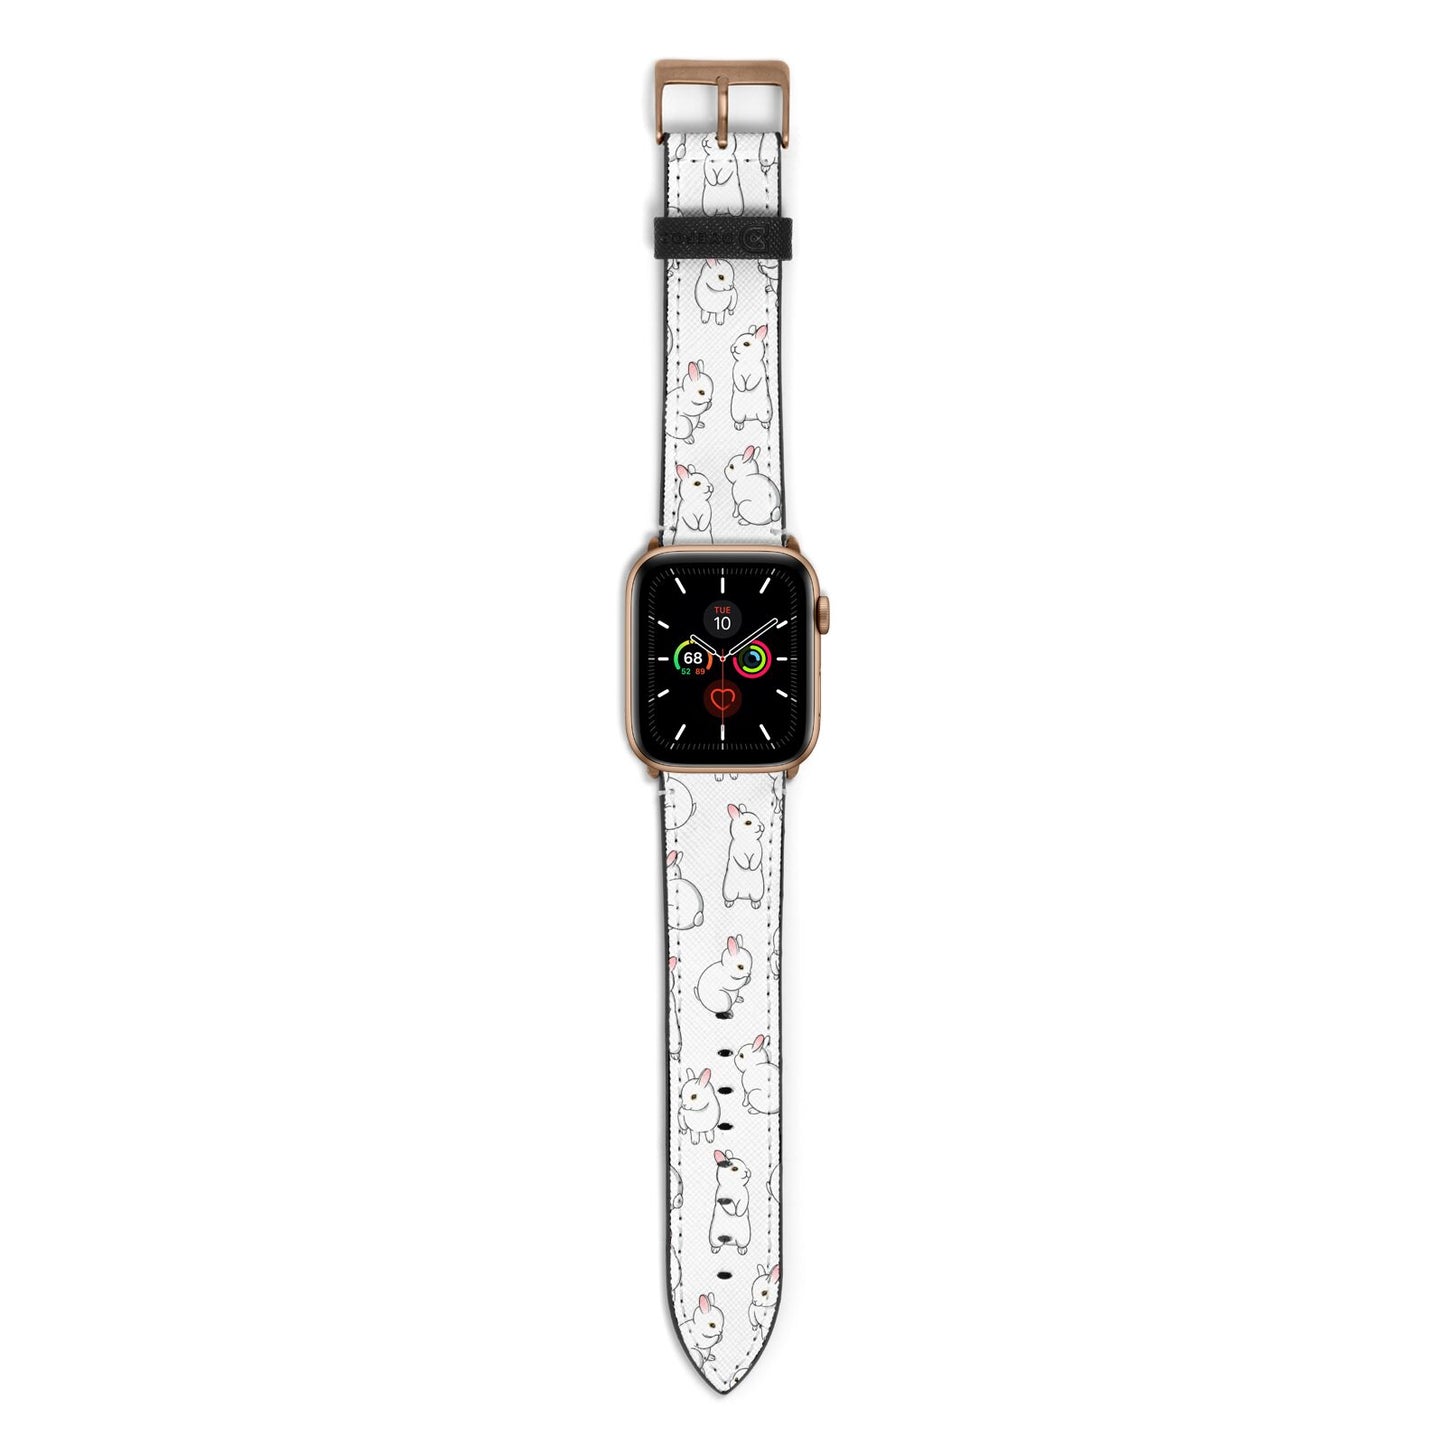 Bunny Rabbit Apple Watch Strap with Gold Hardware